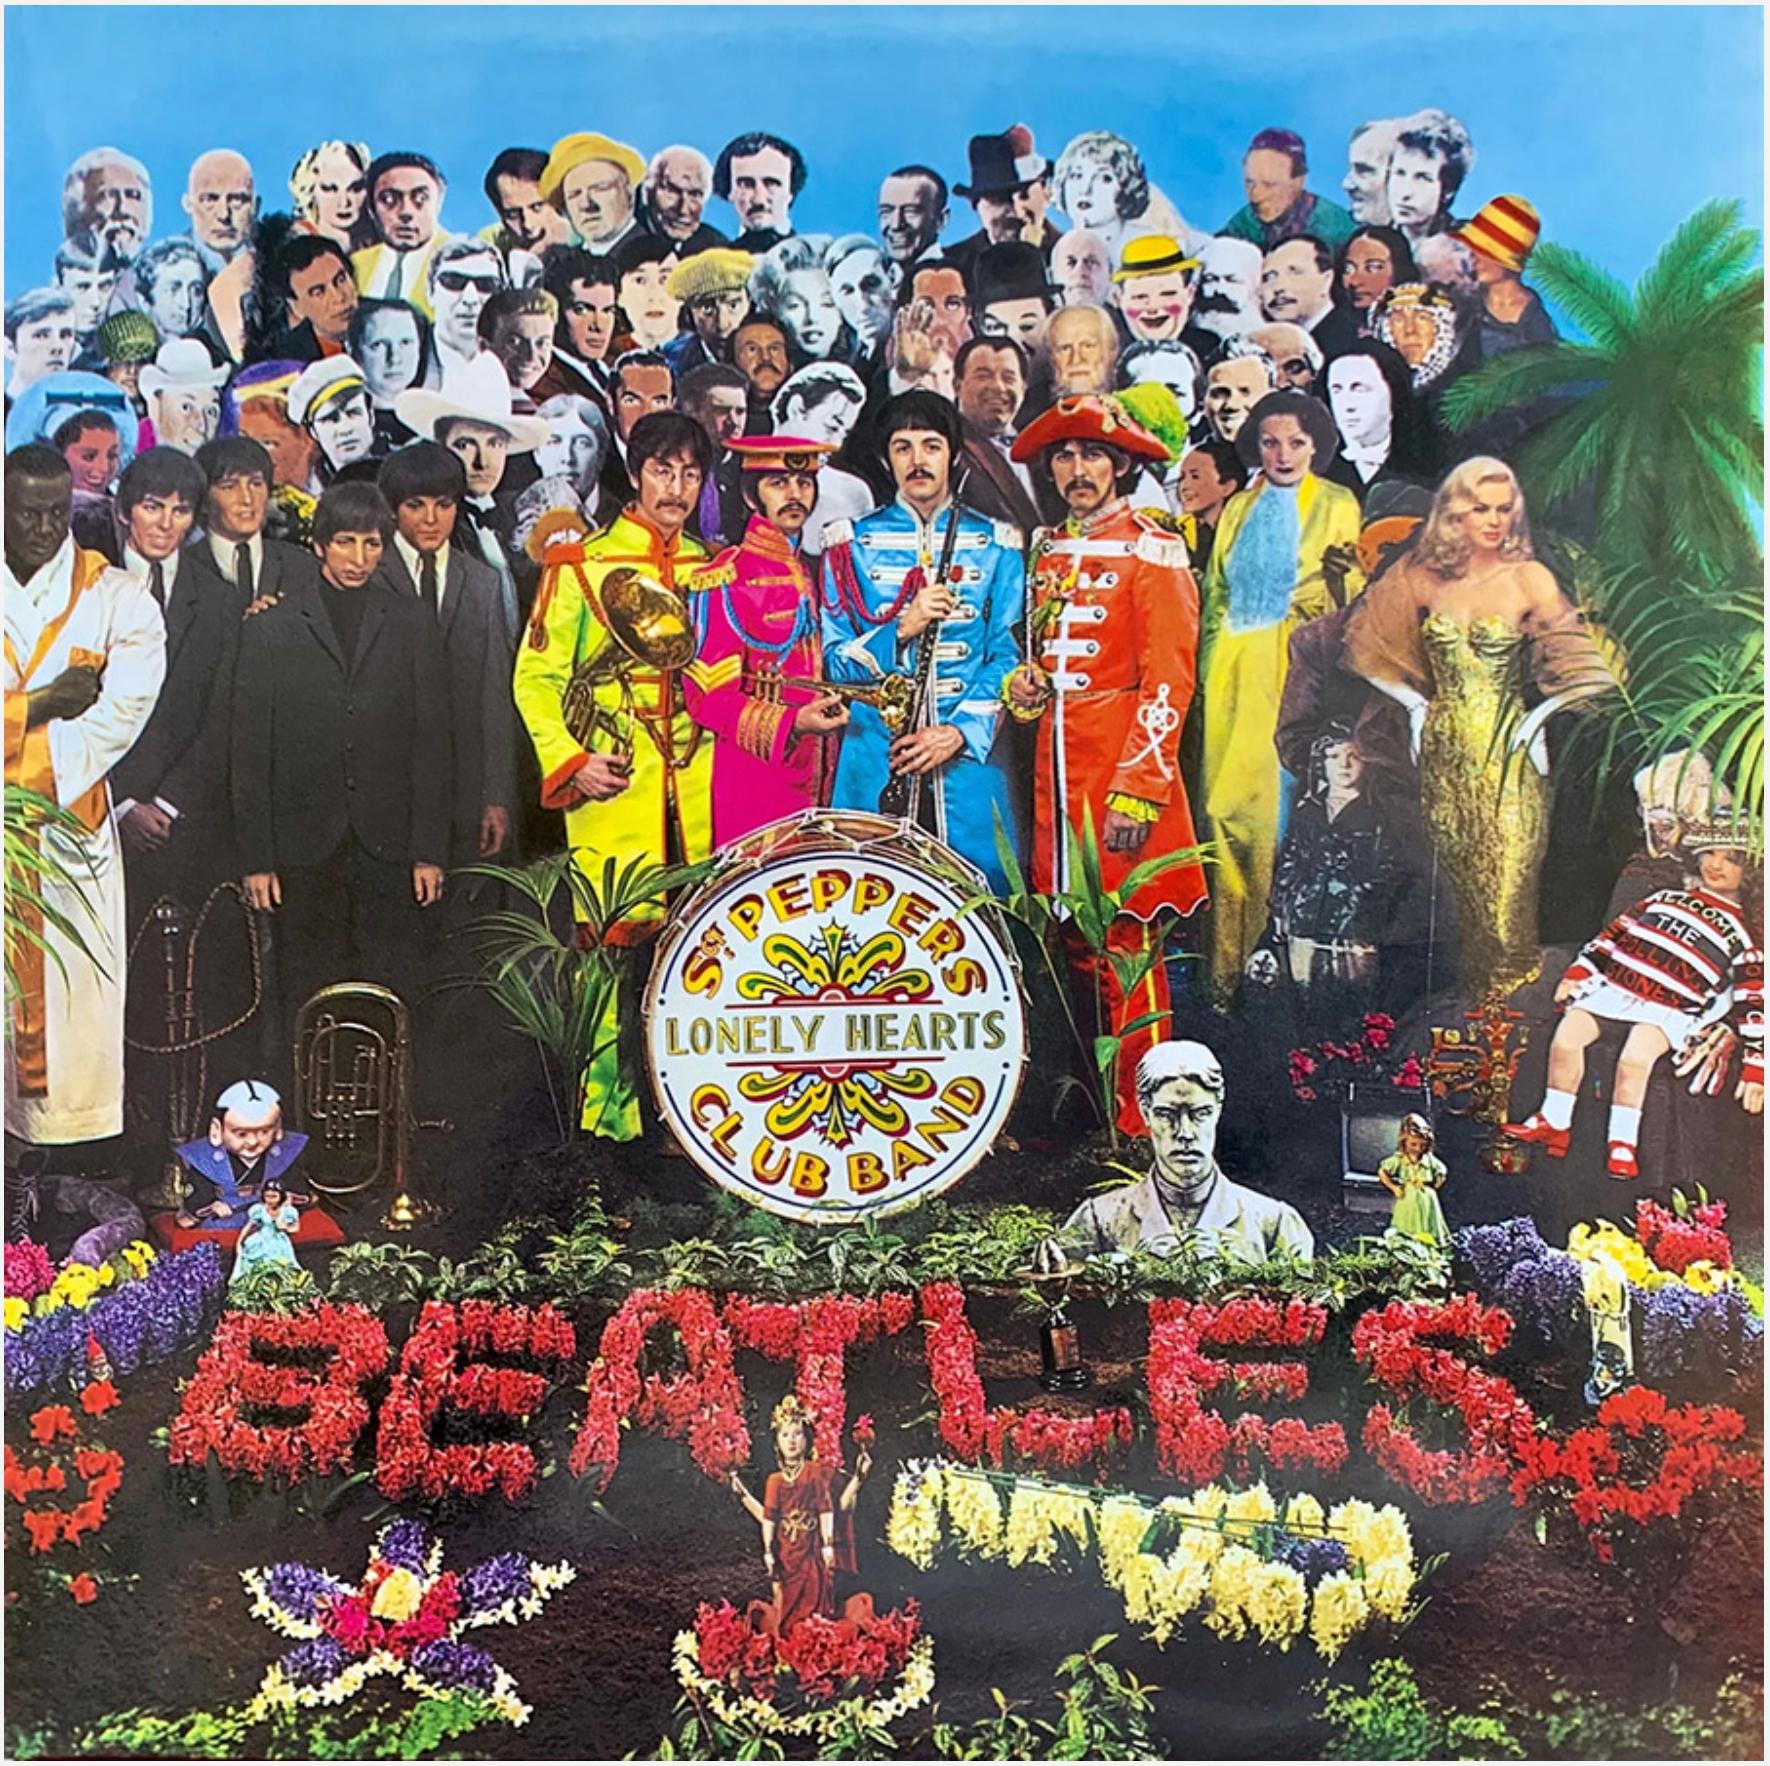 Sgt. Pepper's Lonely Hearts Club Band  - Print by Peter Blake